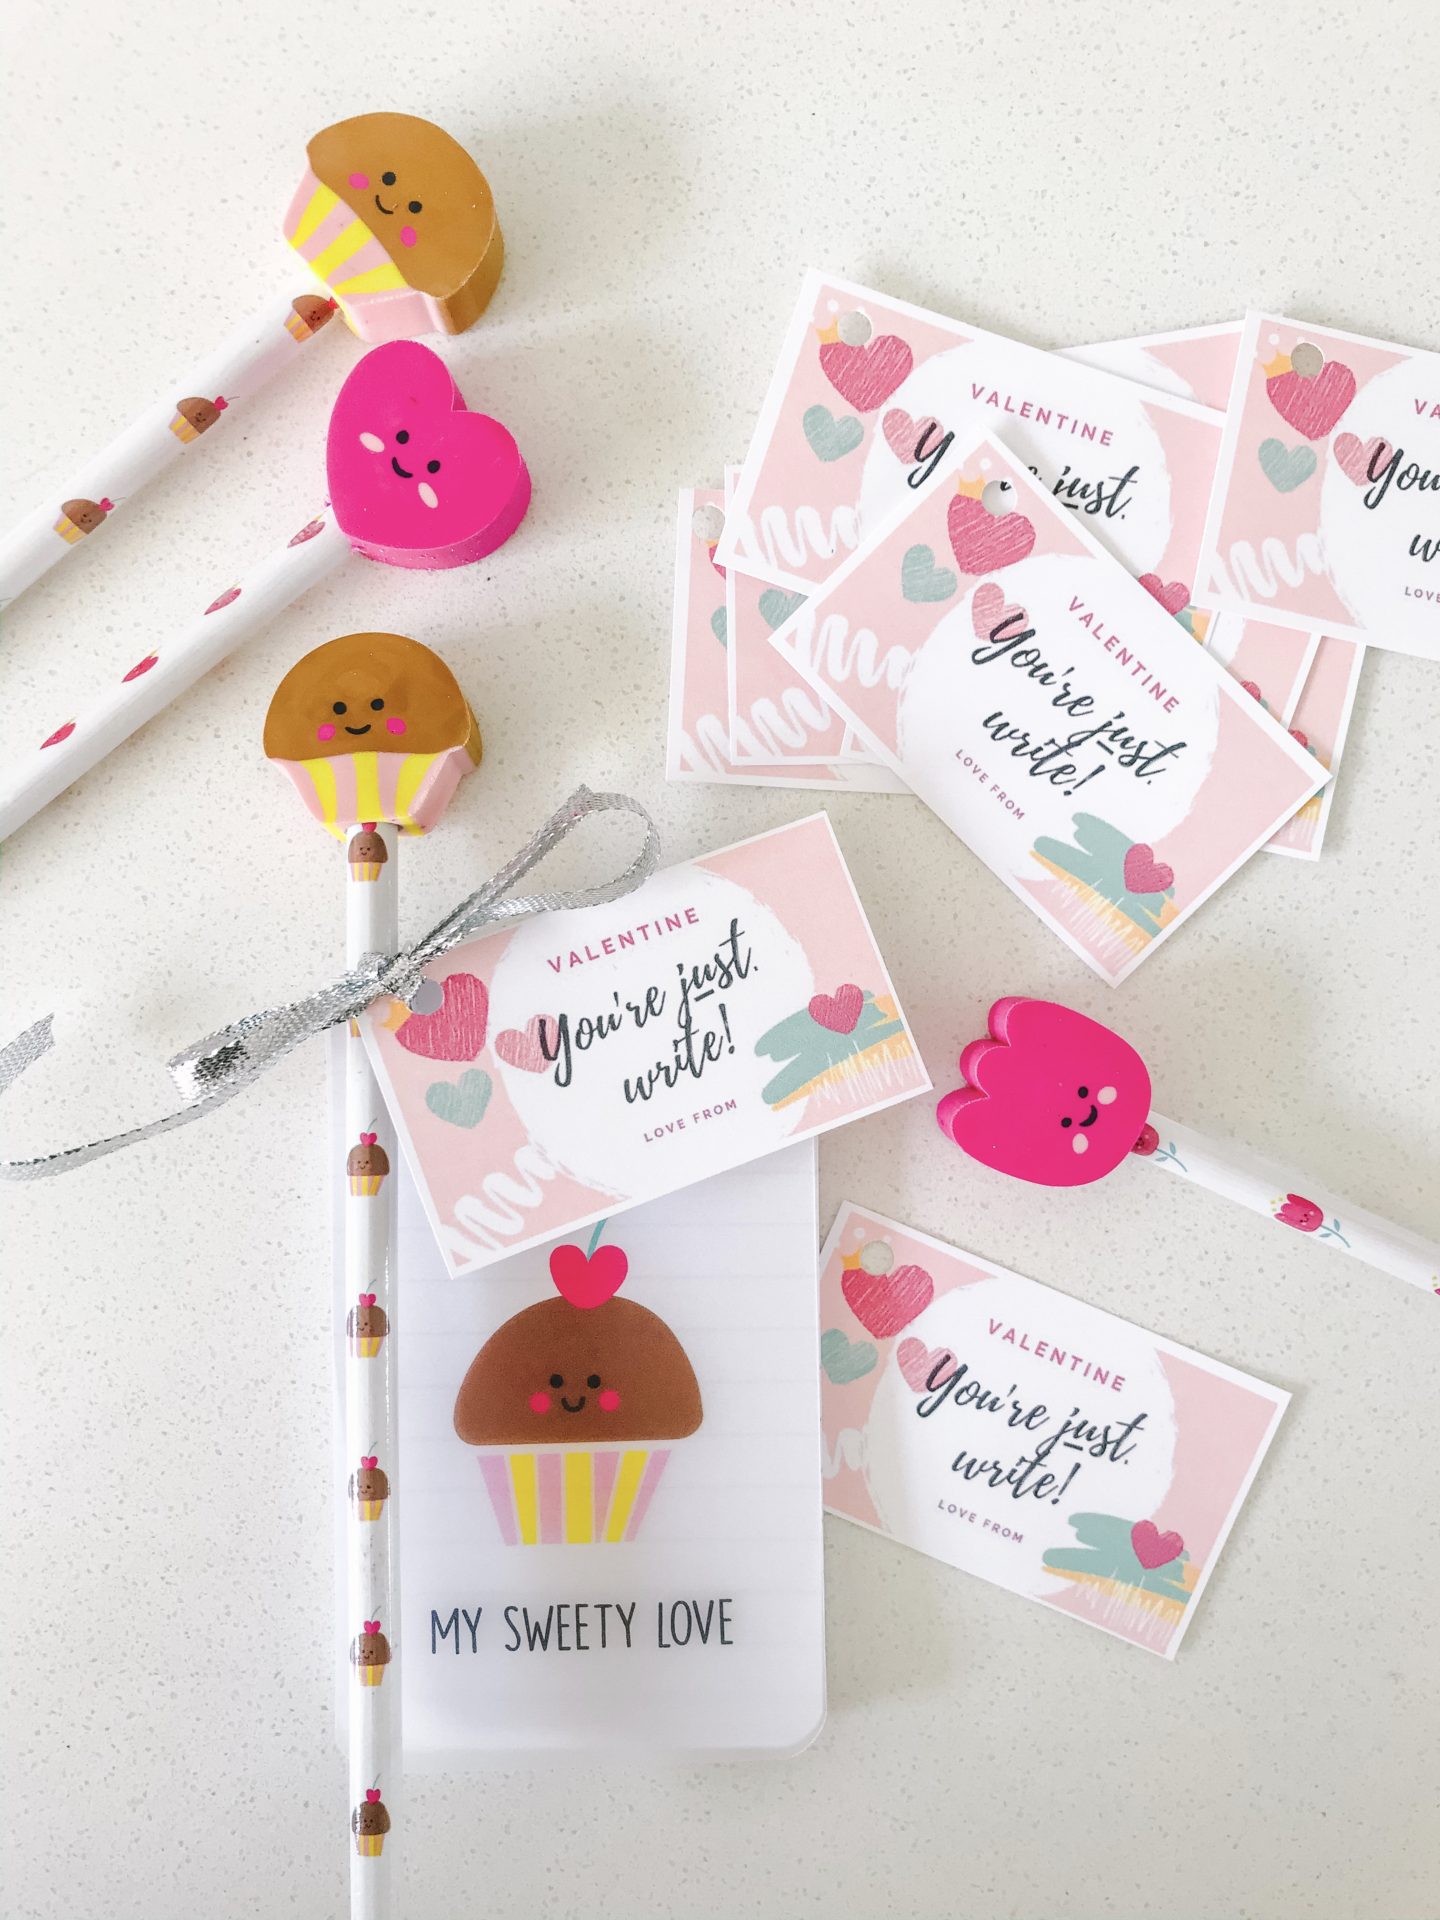 Loving your friends “write” with the perfect Valentine’s Day gift!